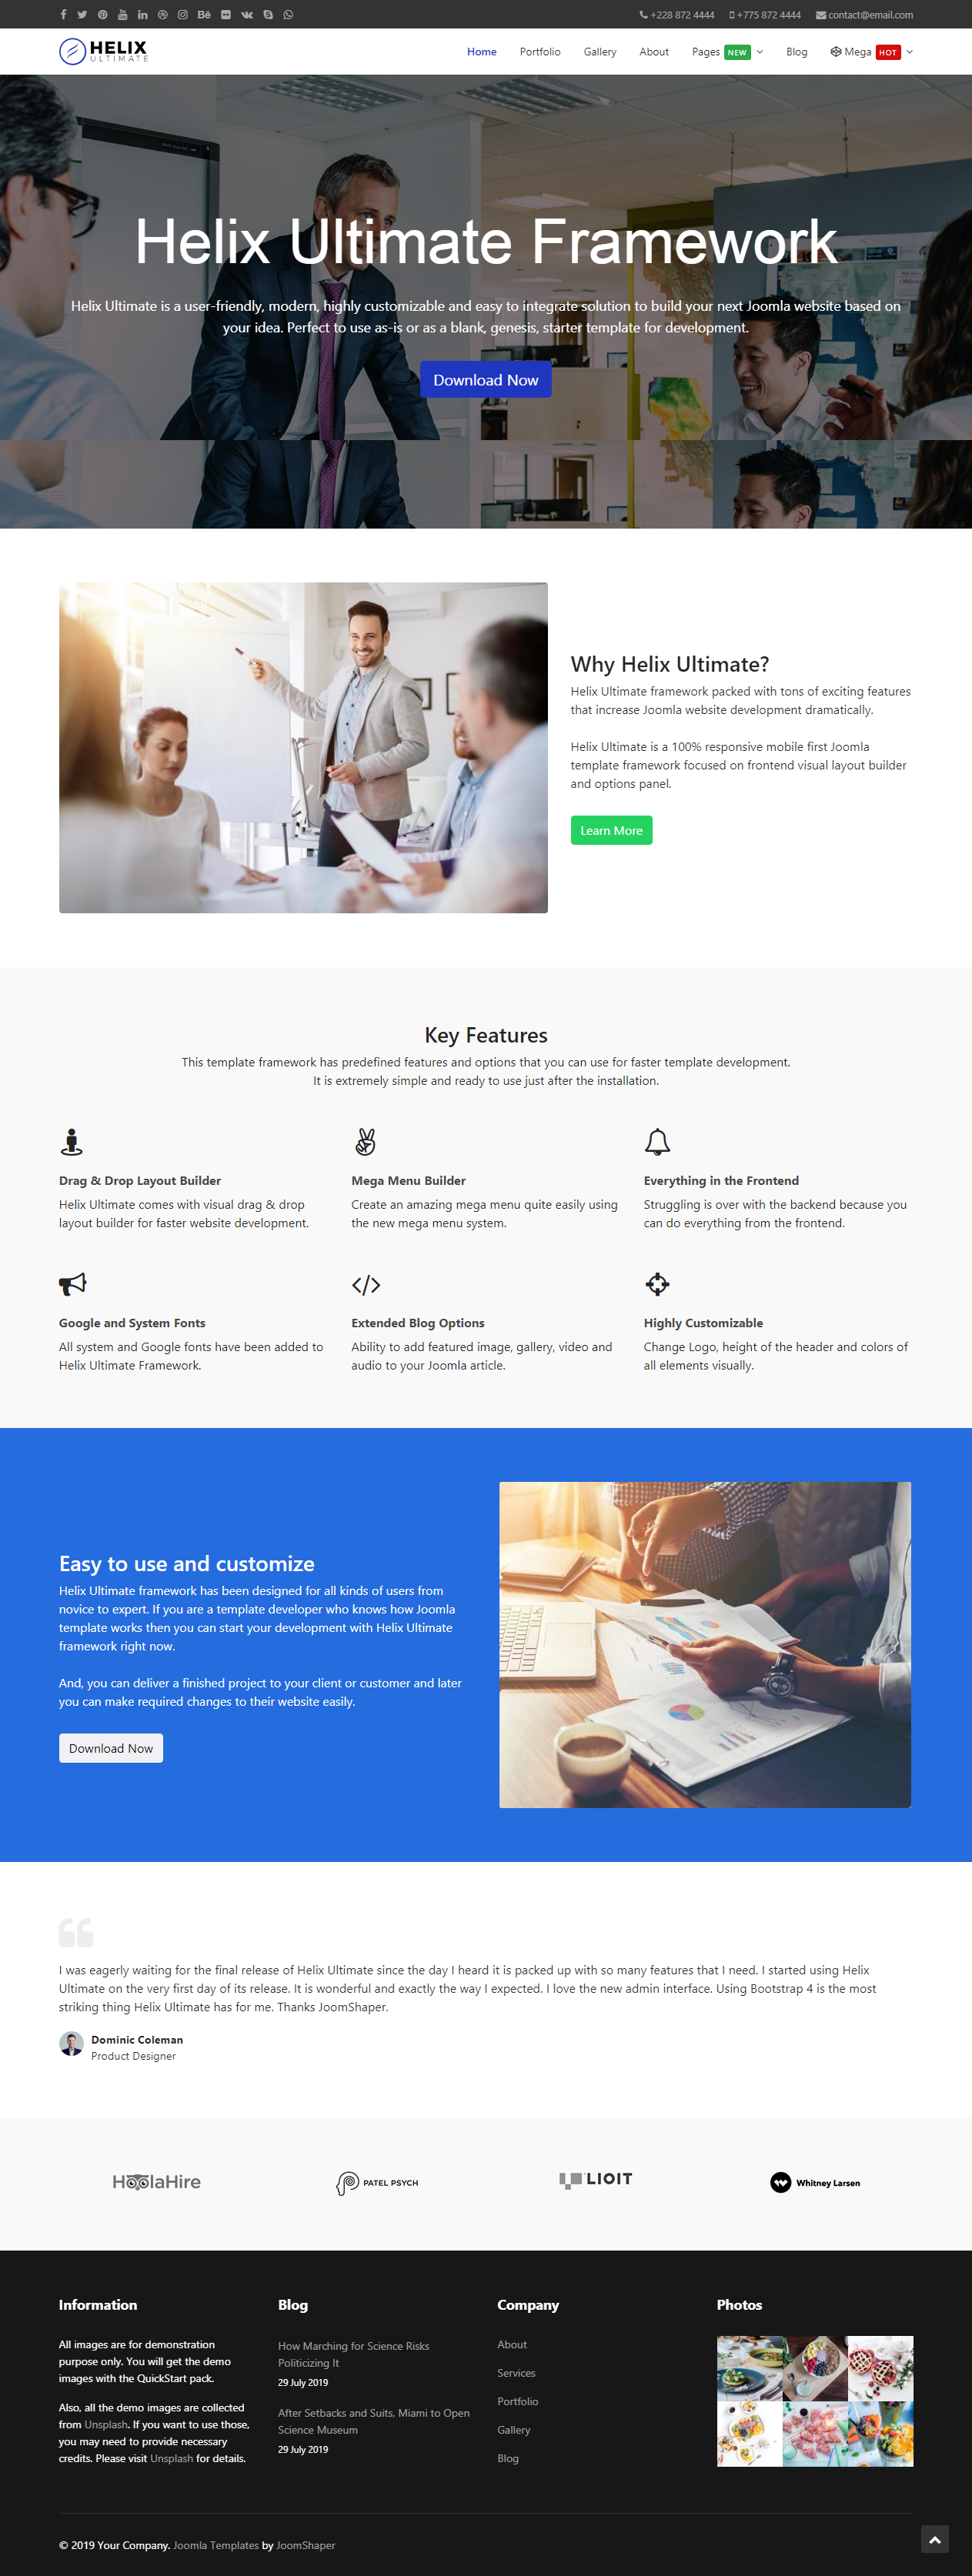 free-joomla-template-with-helix-framework-and-sp-page-builder-pro